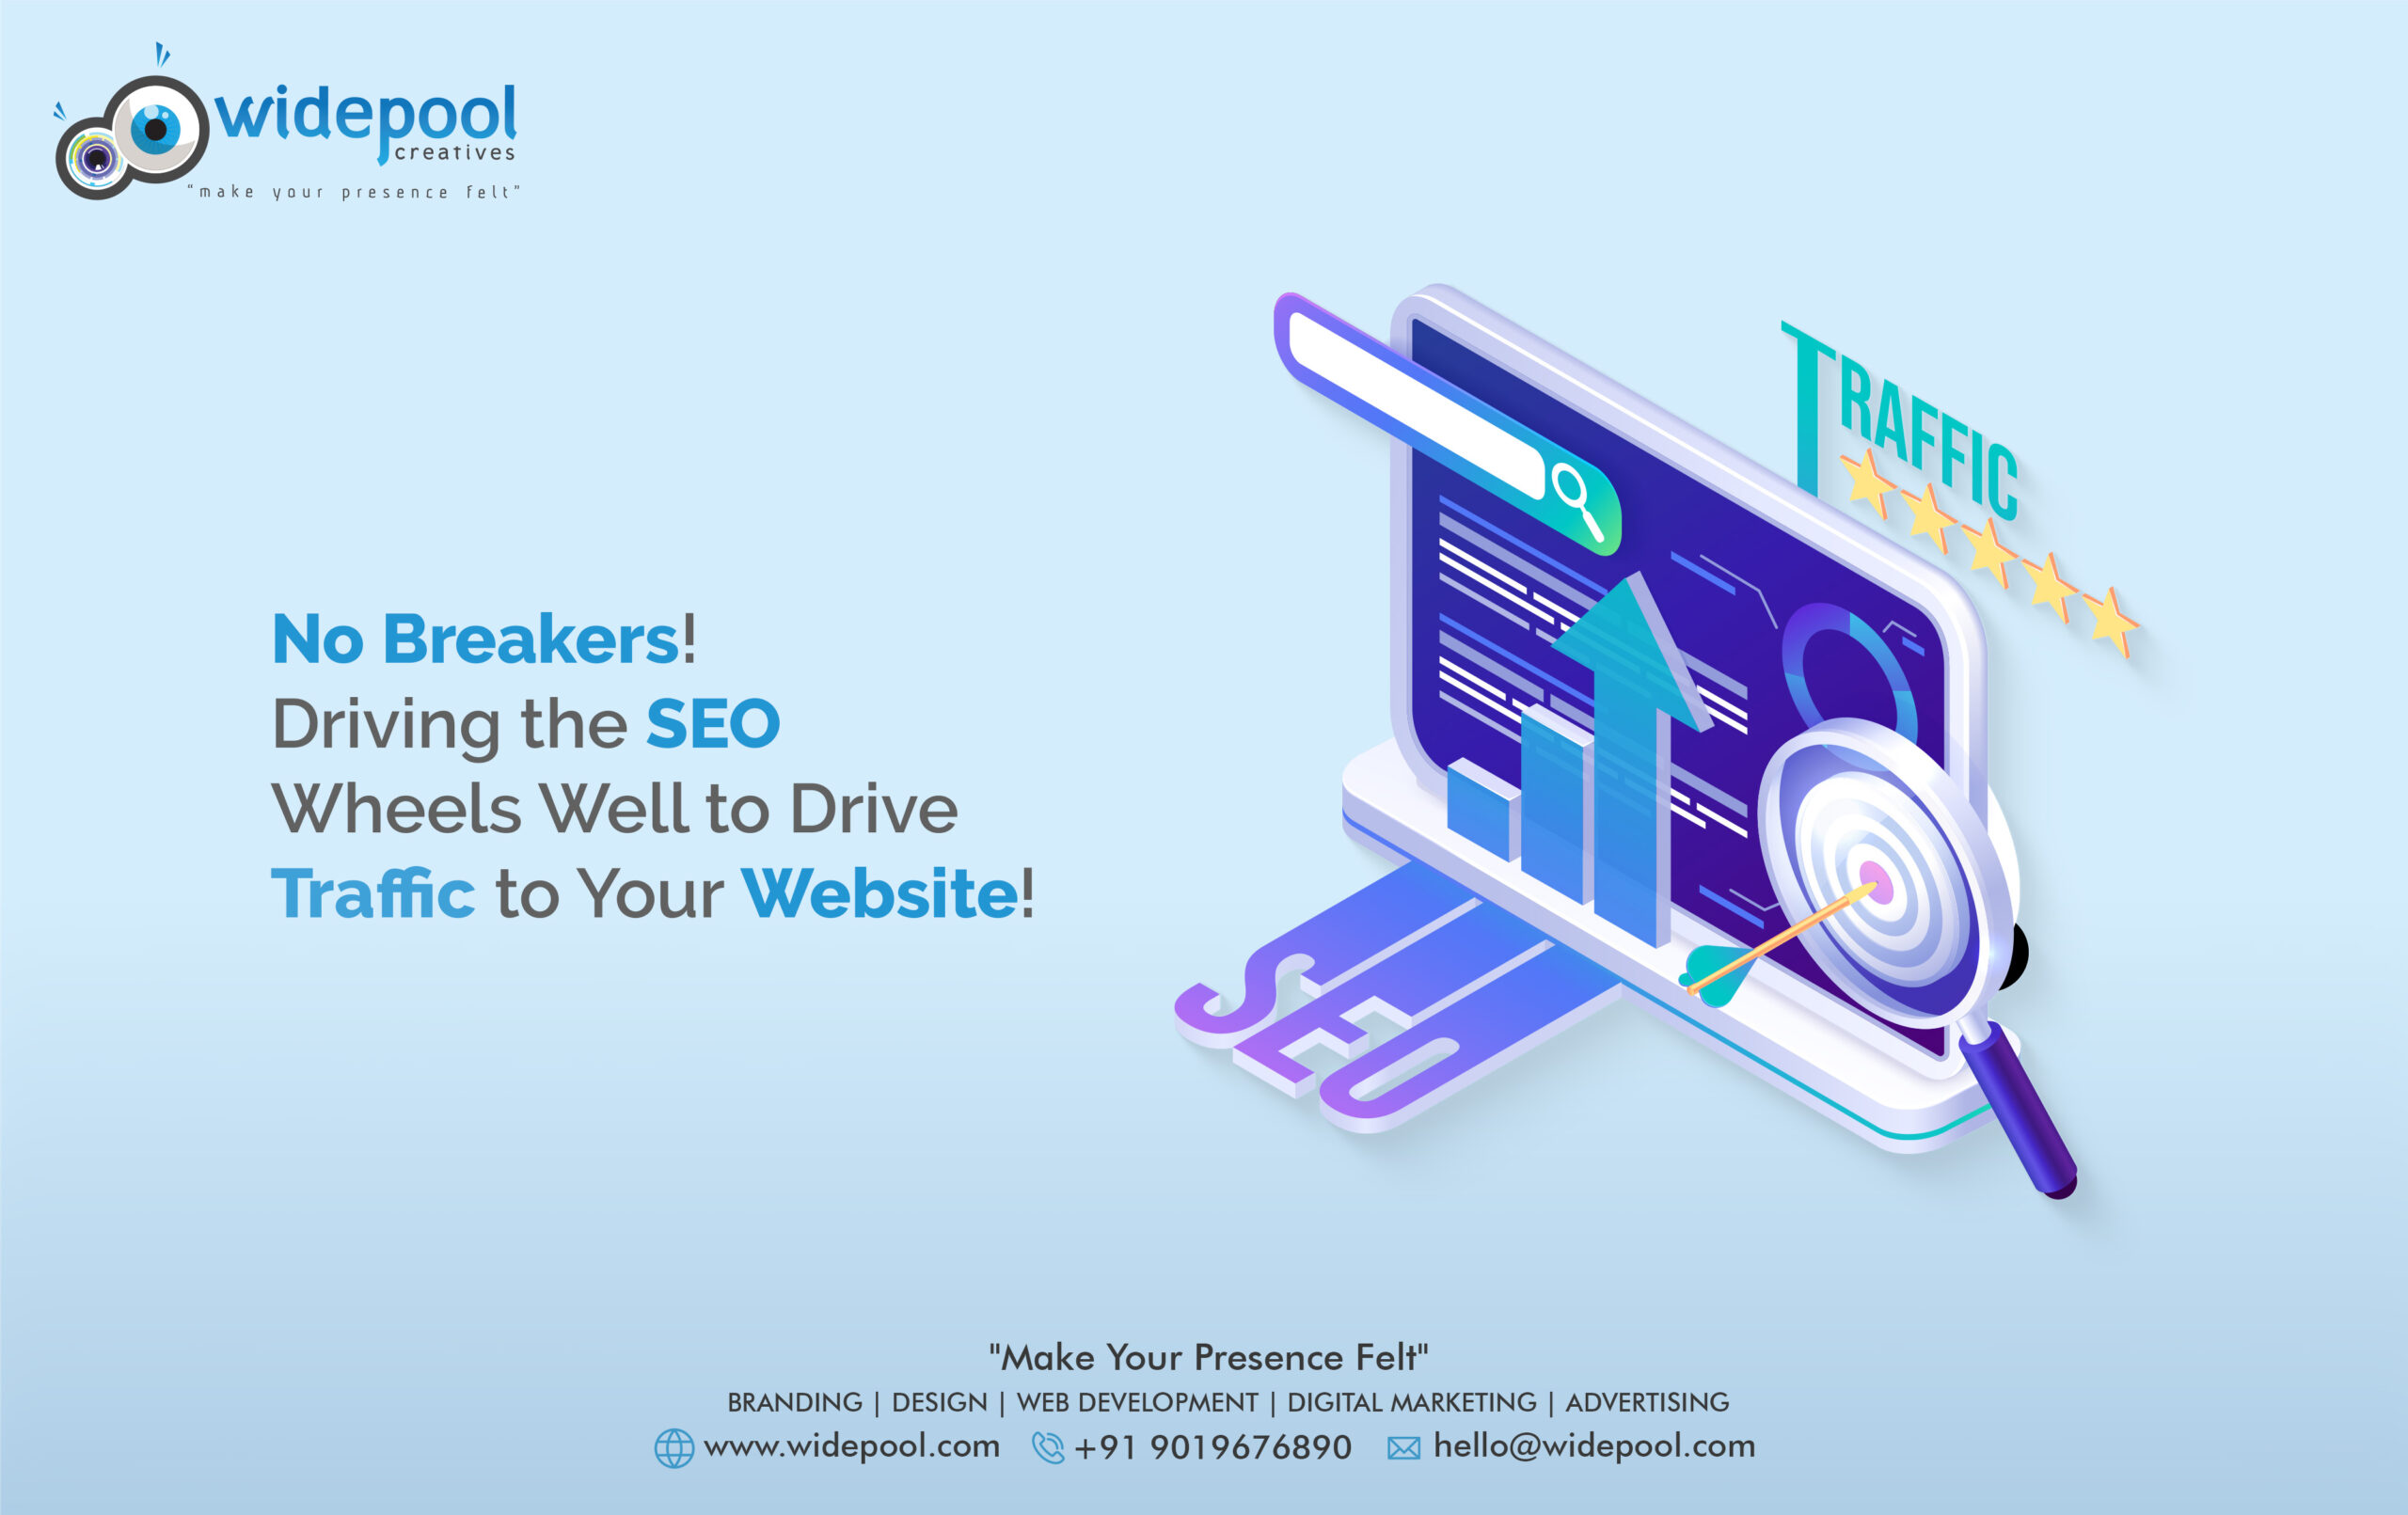 No Breakers! Driving the SEO Wheels Well to Drive Traffic to Your Website!